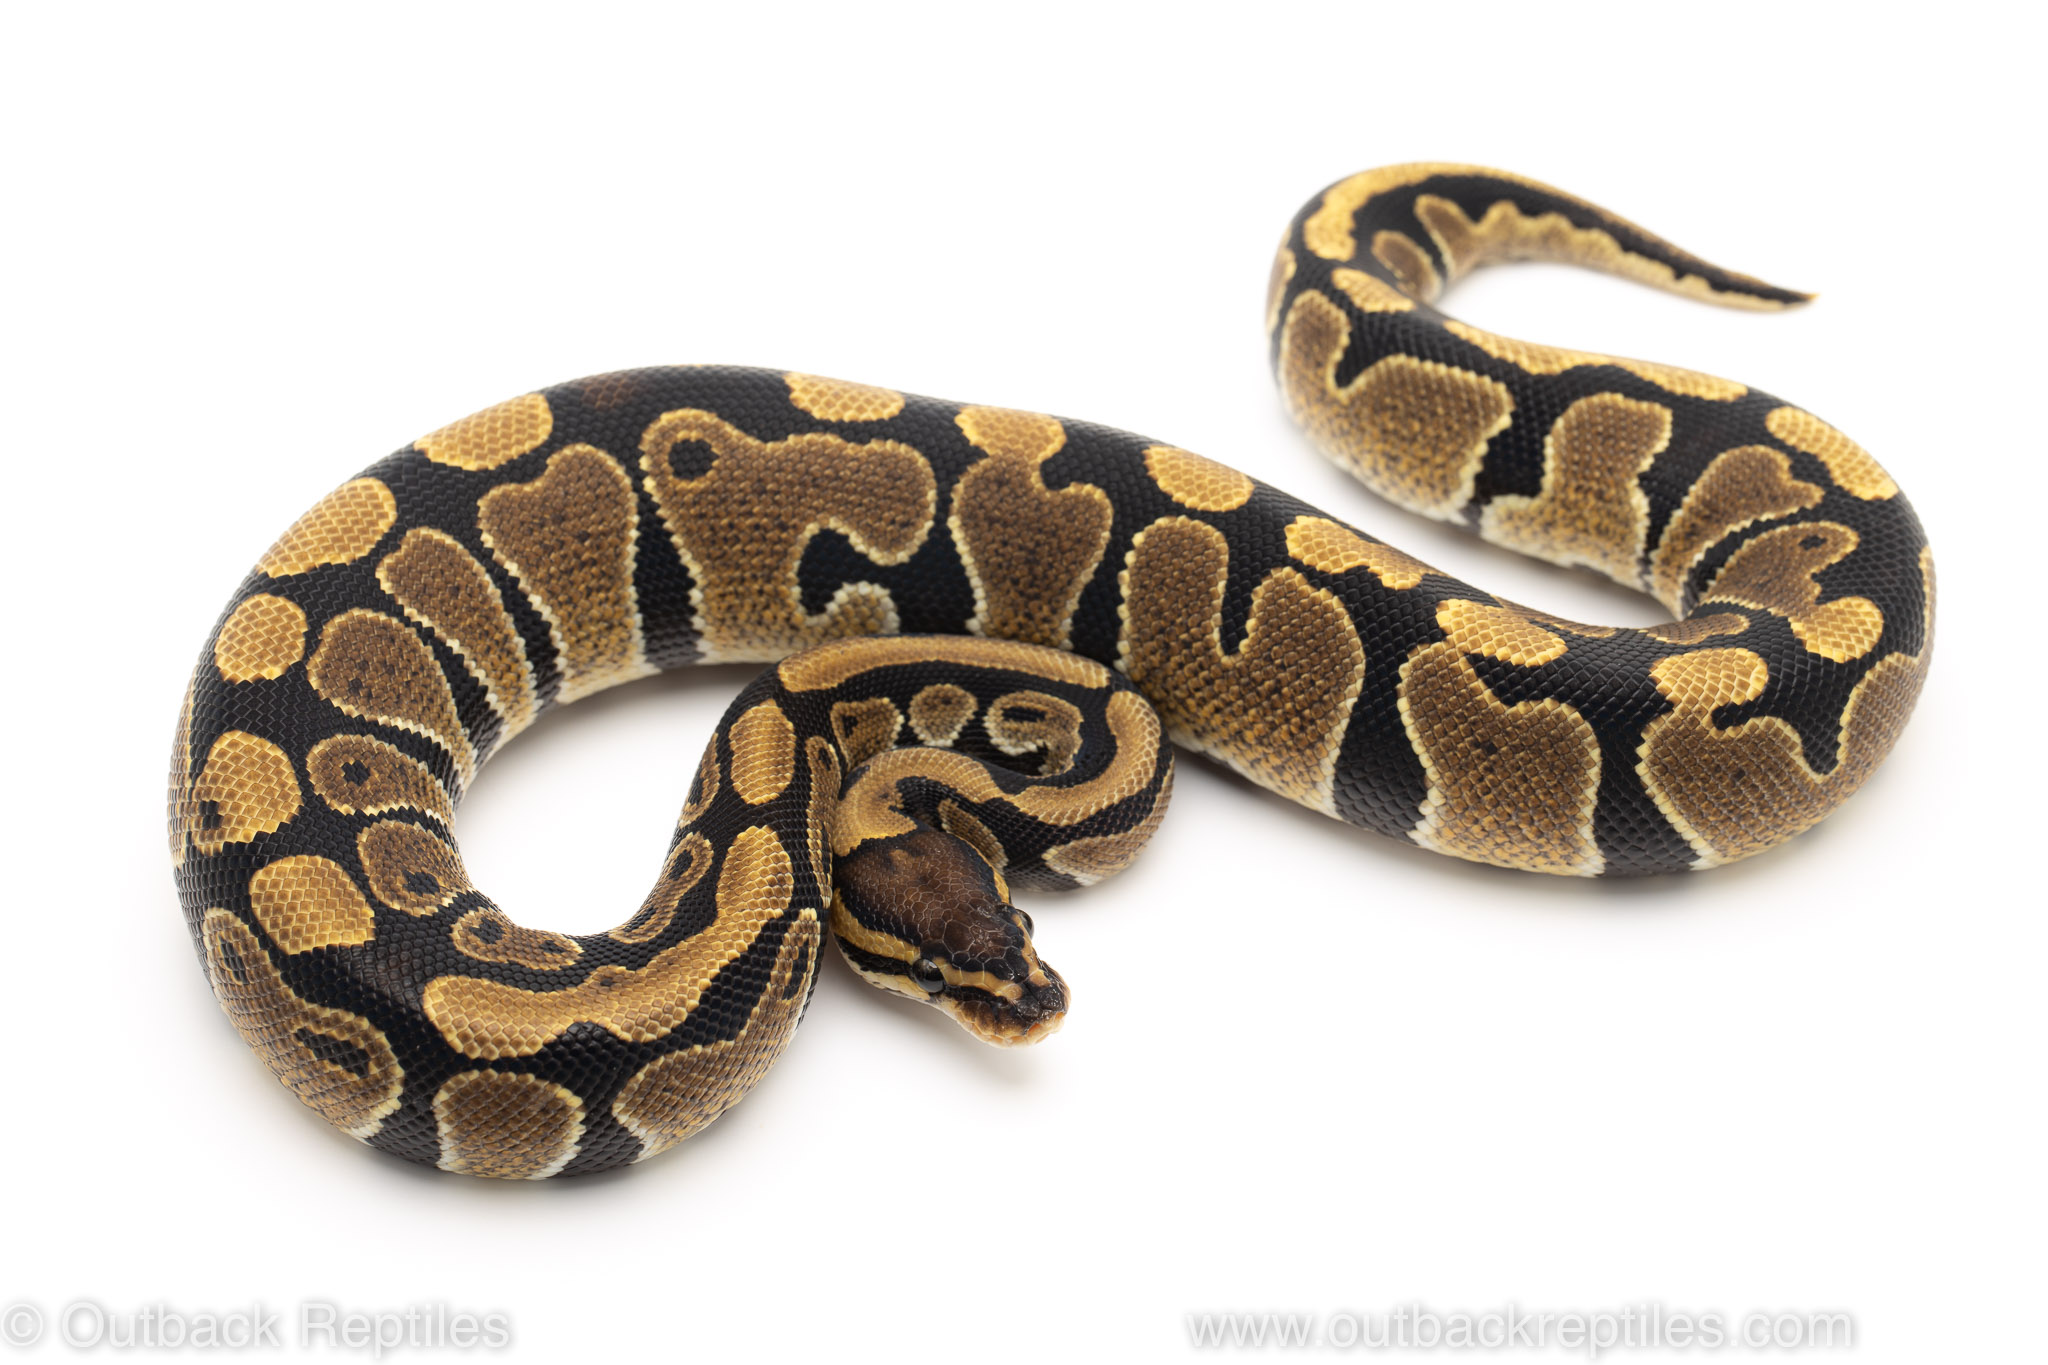 DH Candy Clown ball python for sale